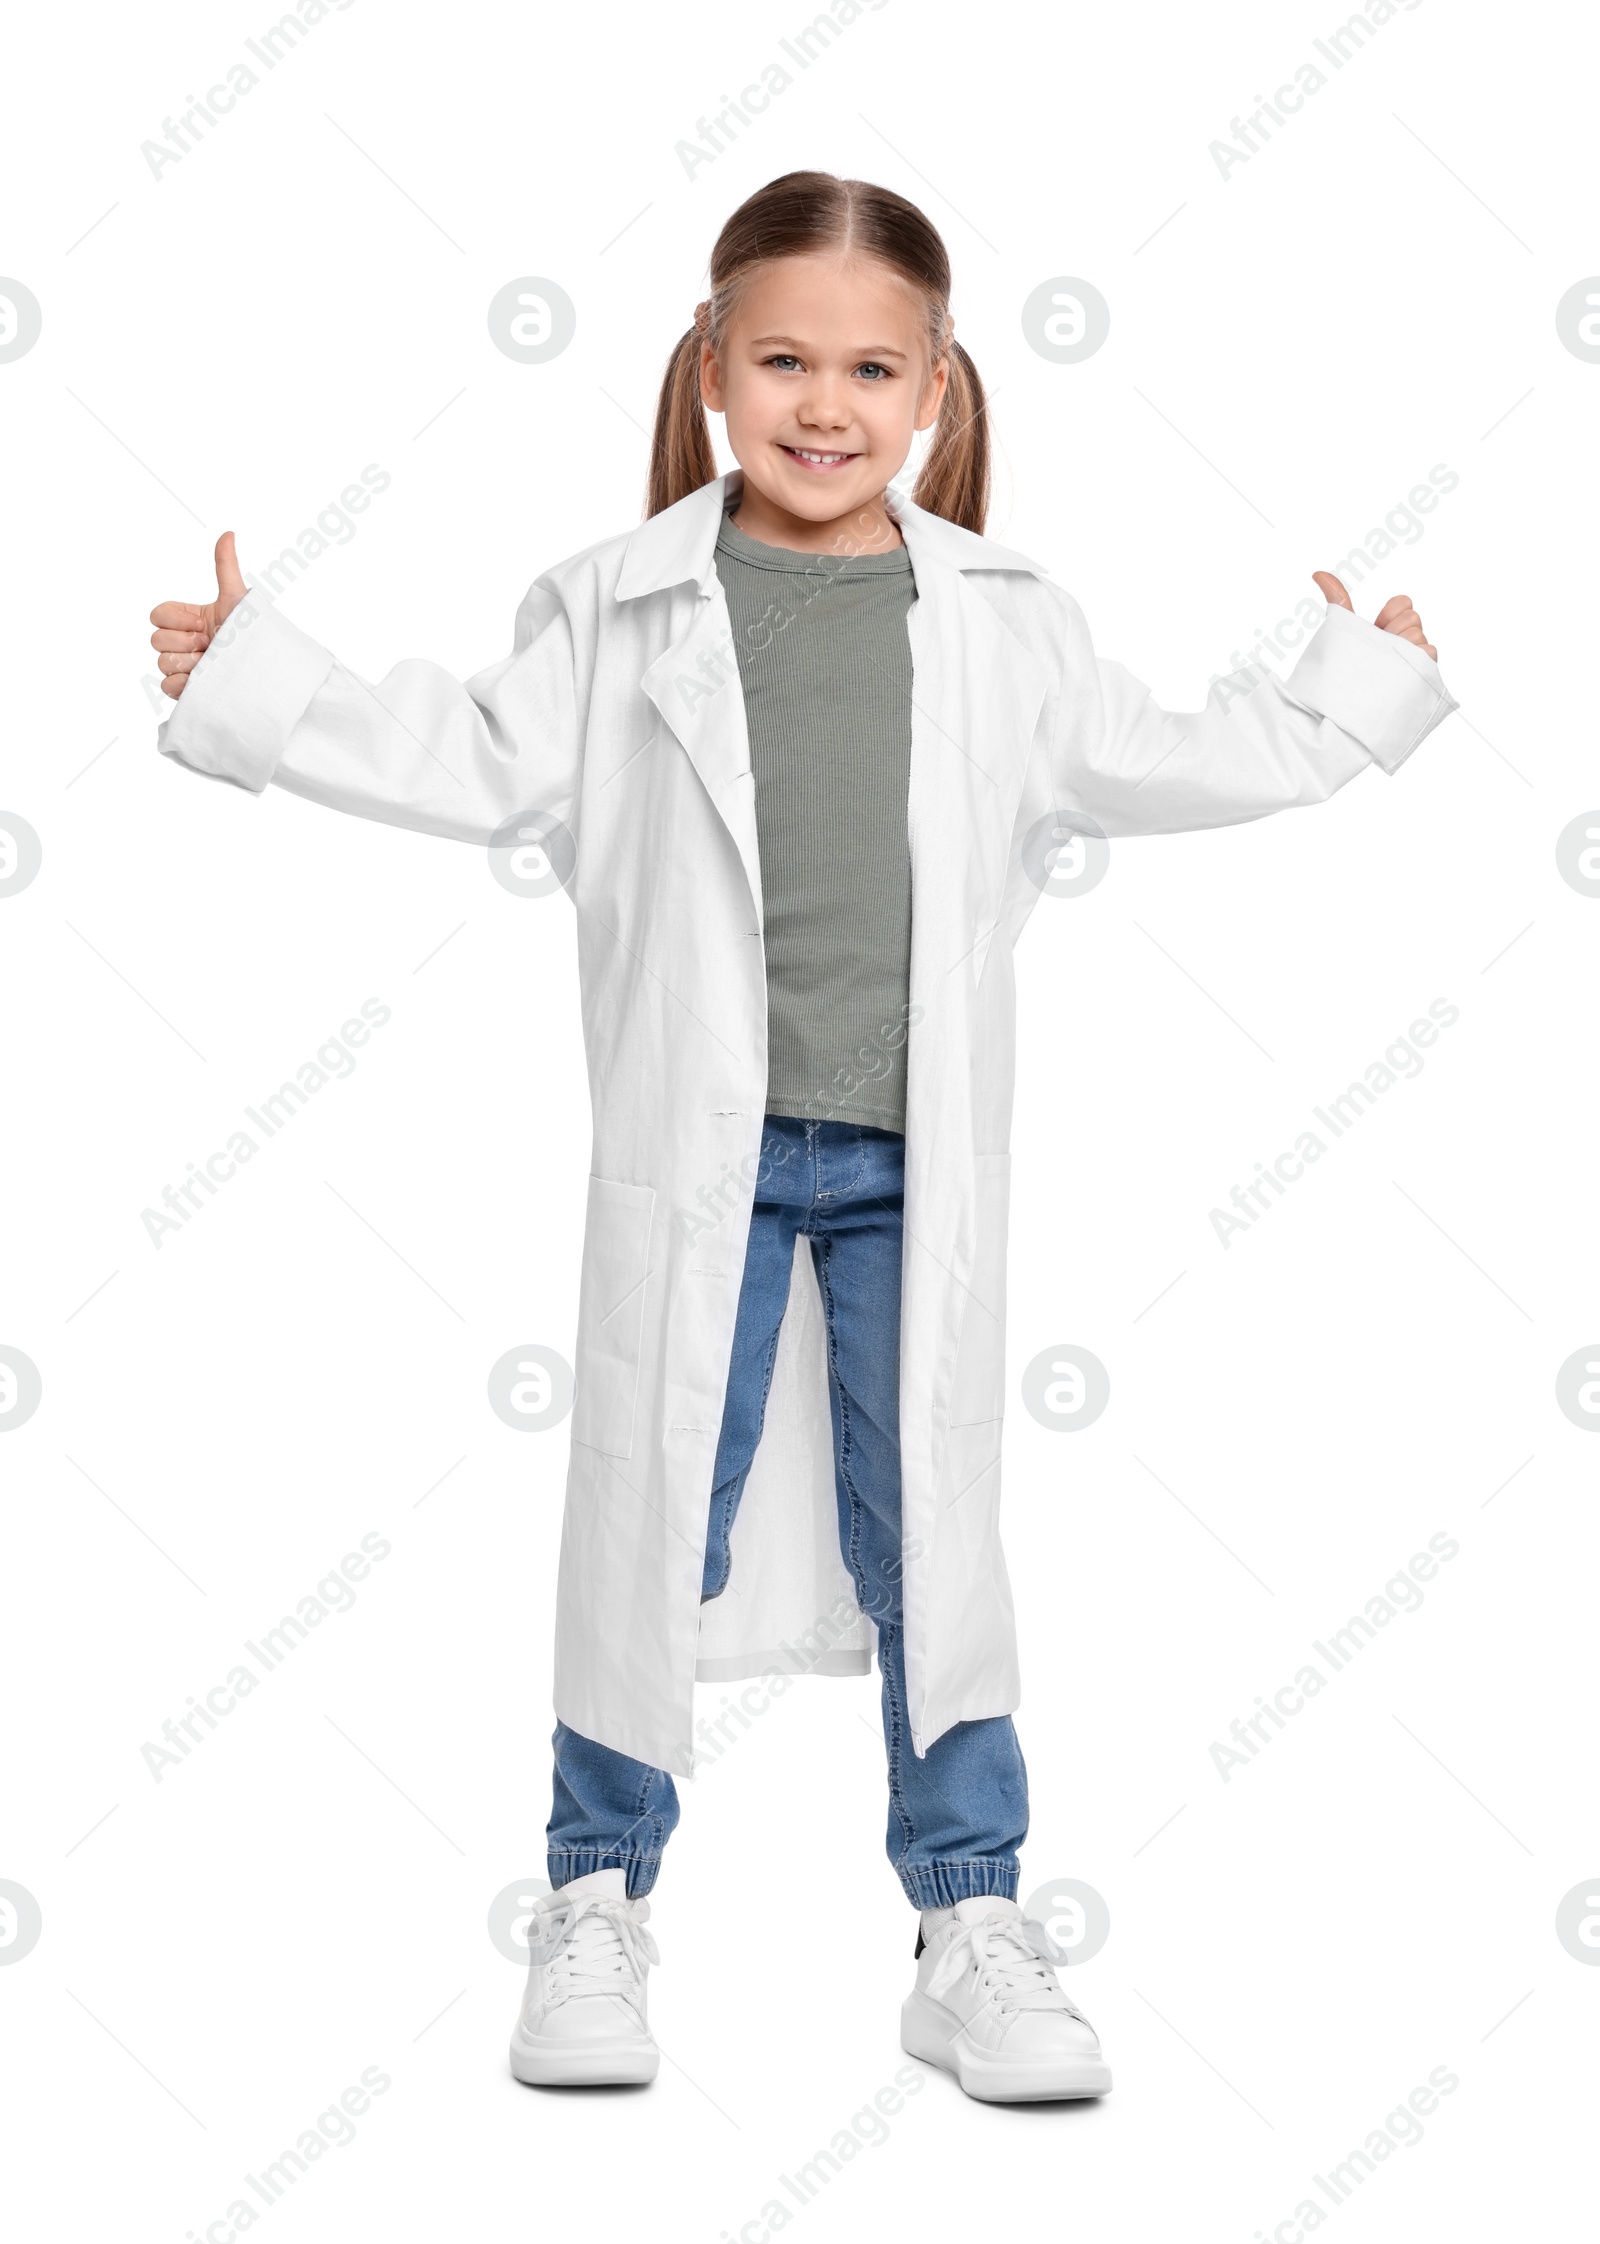 Photo of Little girl in medical uniform showing thumbs up on white background